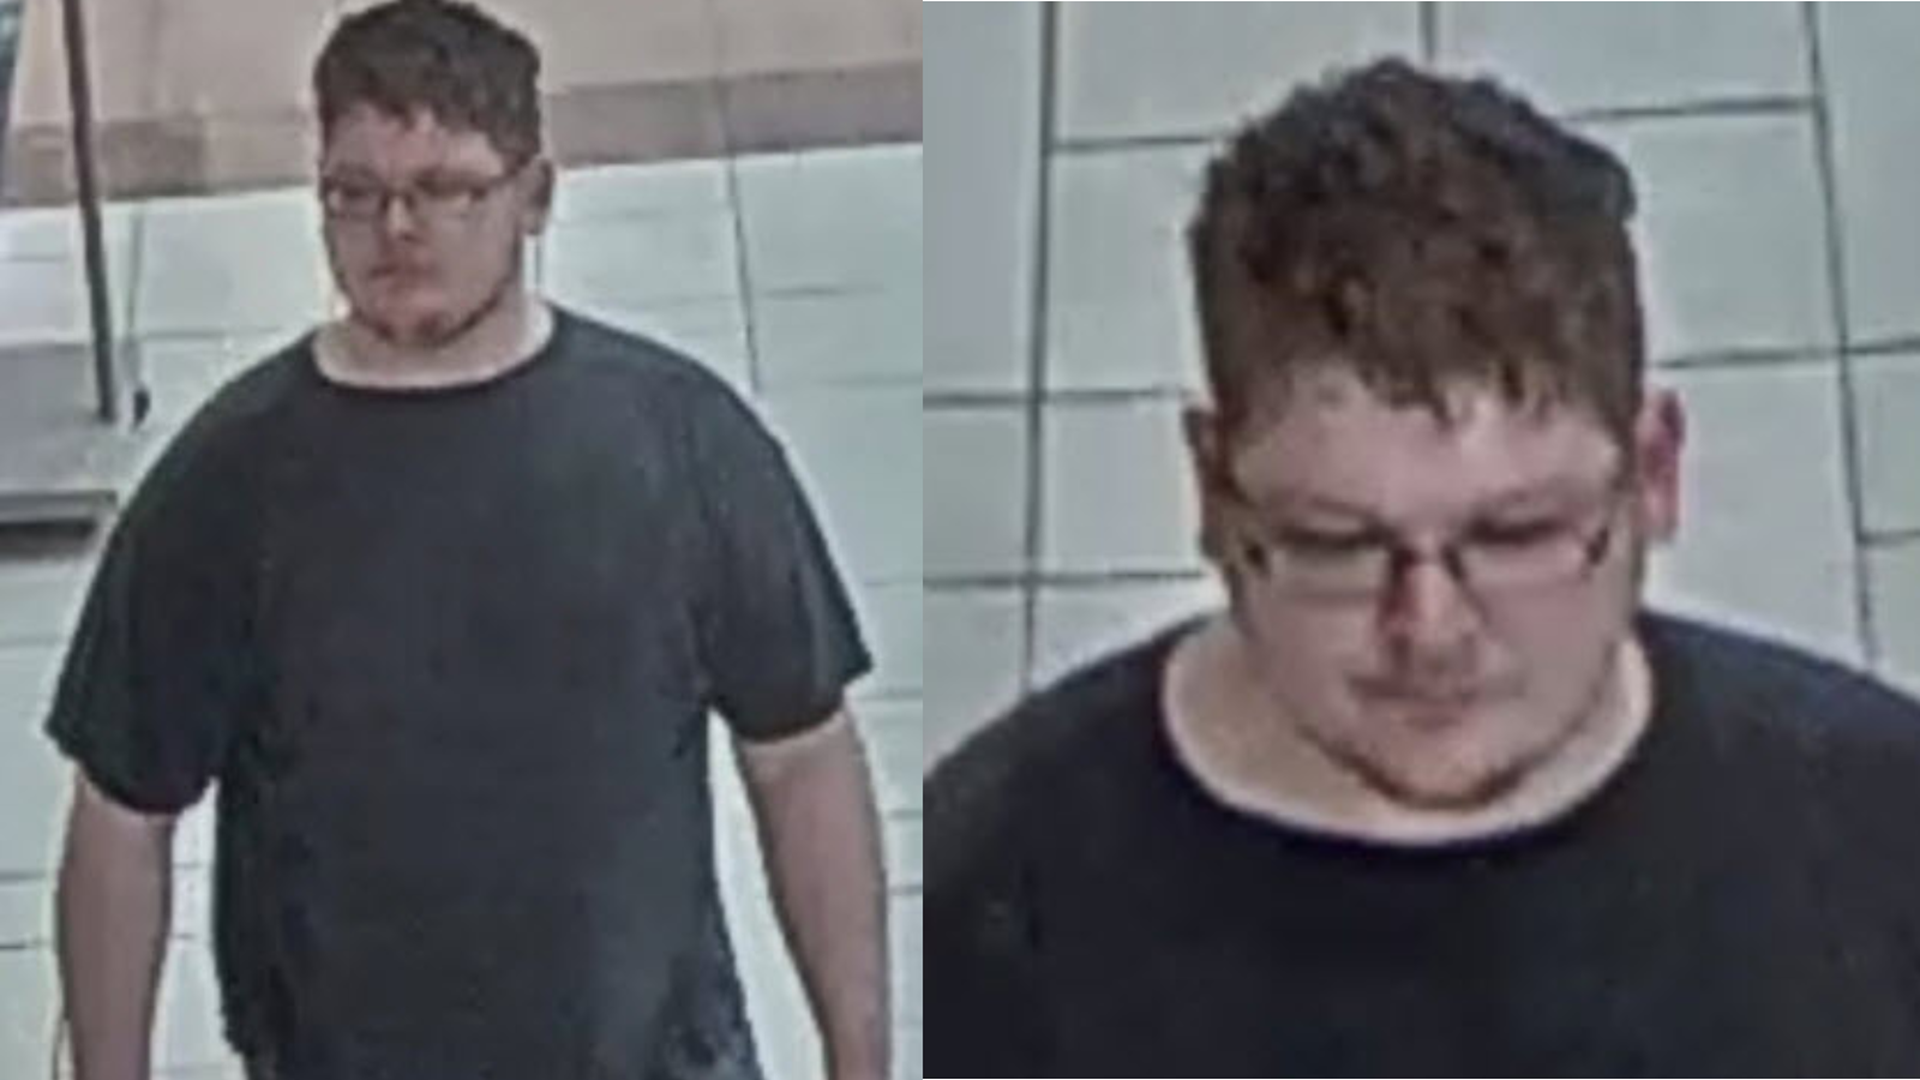 The Grandville Police Department are looking for a man who they say exposed himself to an employee at a Grandville store on Wednesday, May 22. Anyone having information about the incident is urged to call Silent Observer or Grandville Police Tip Line at 616-538-6110, option 2.